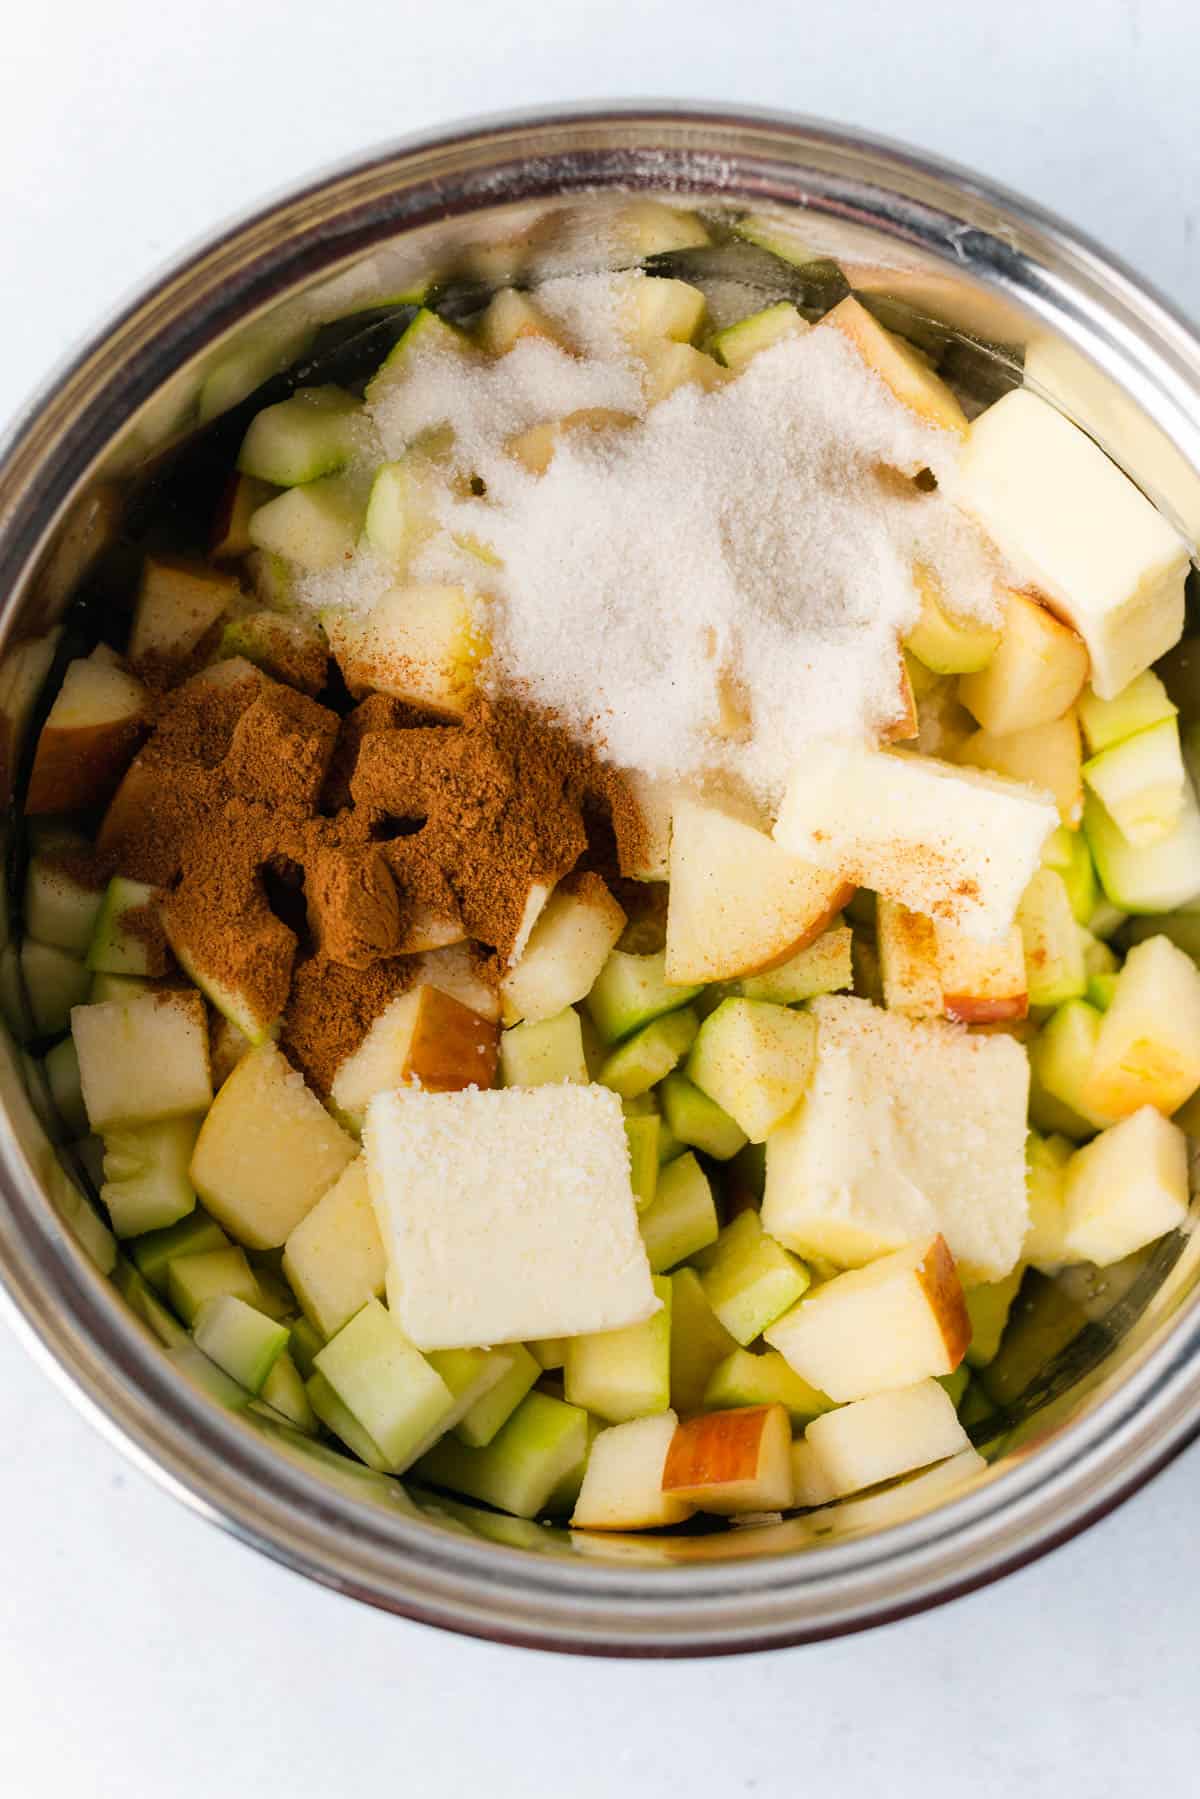 apples and zucchini with sweetener, butter and cinnamon